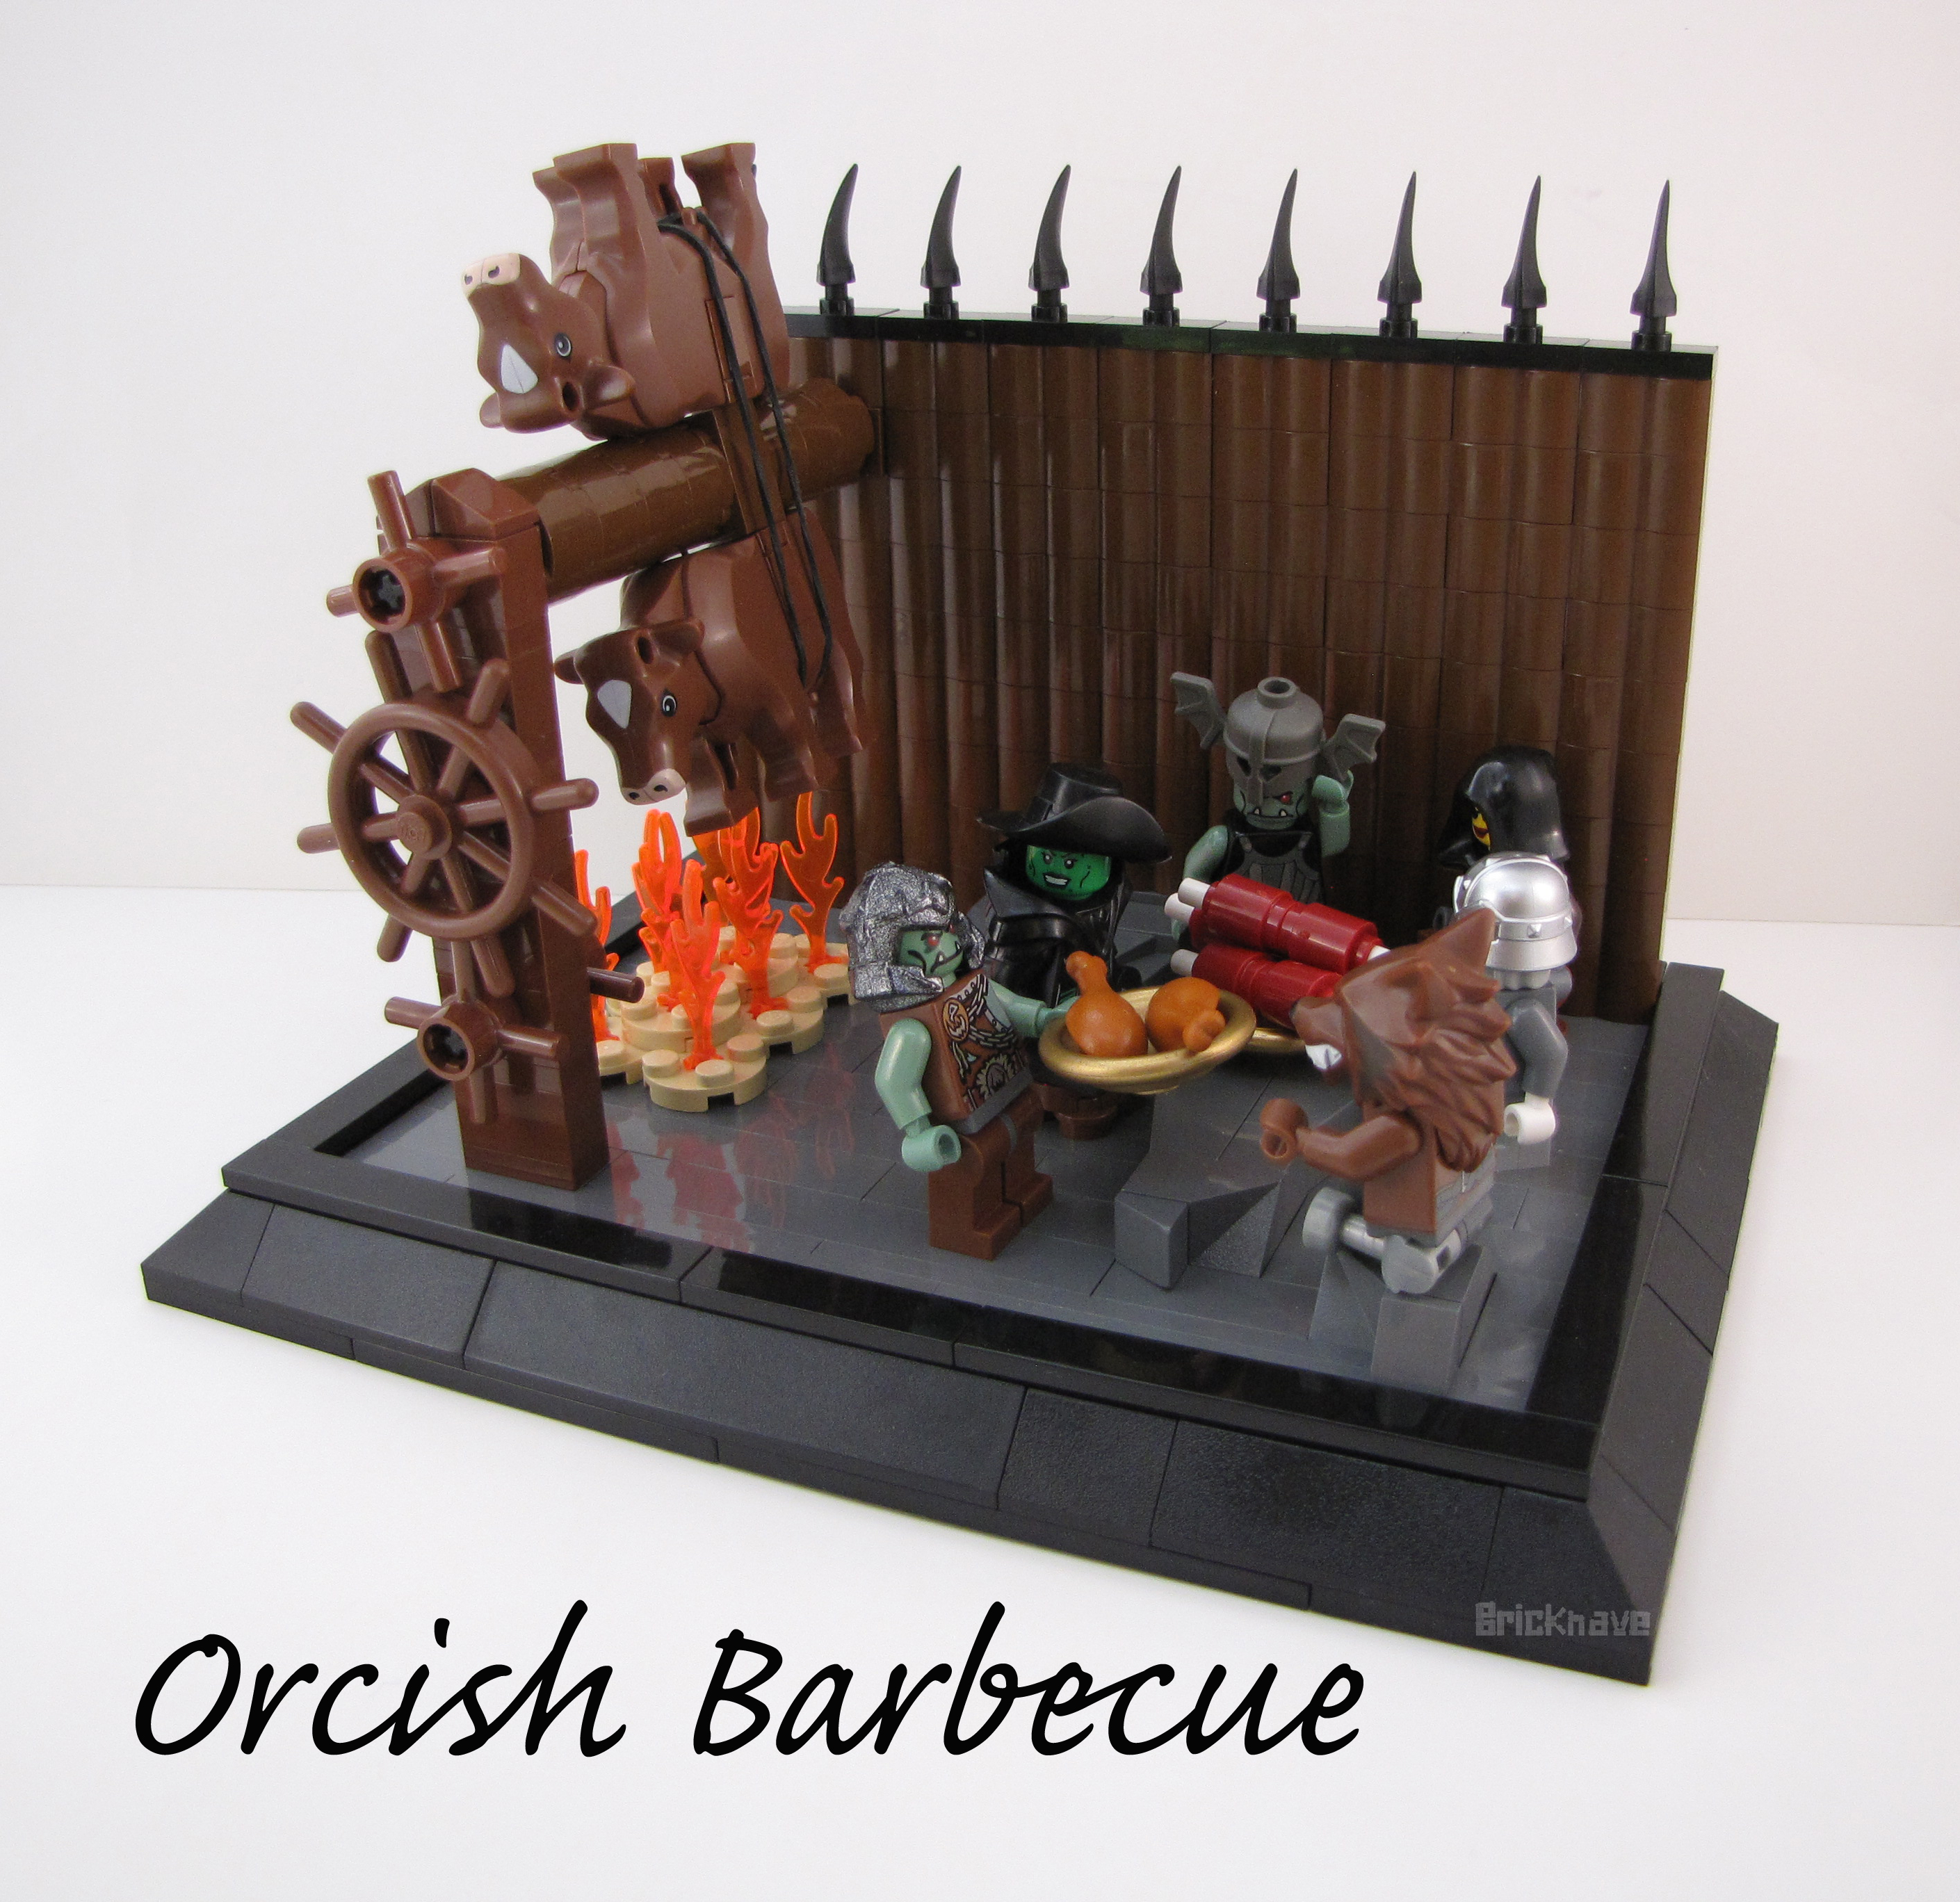 Orcish Barbecue